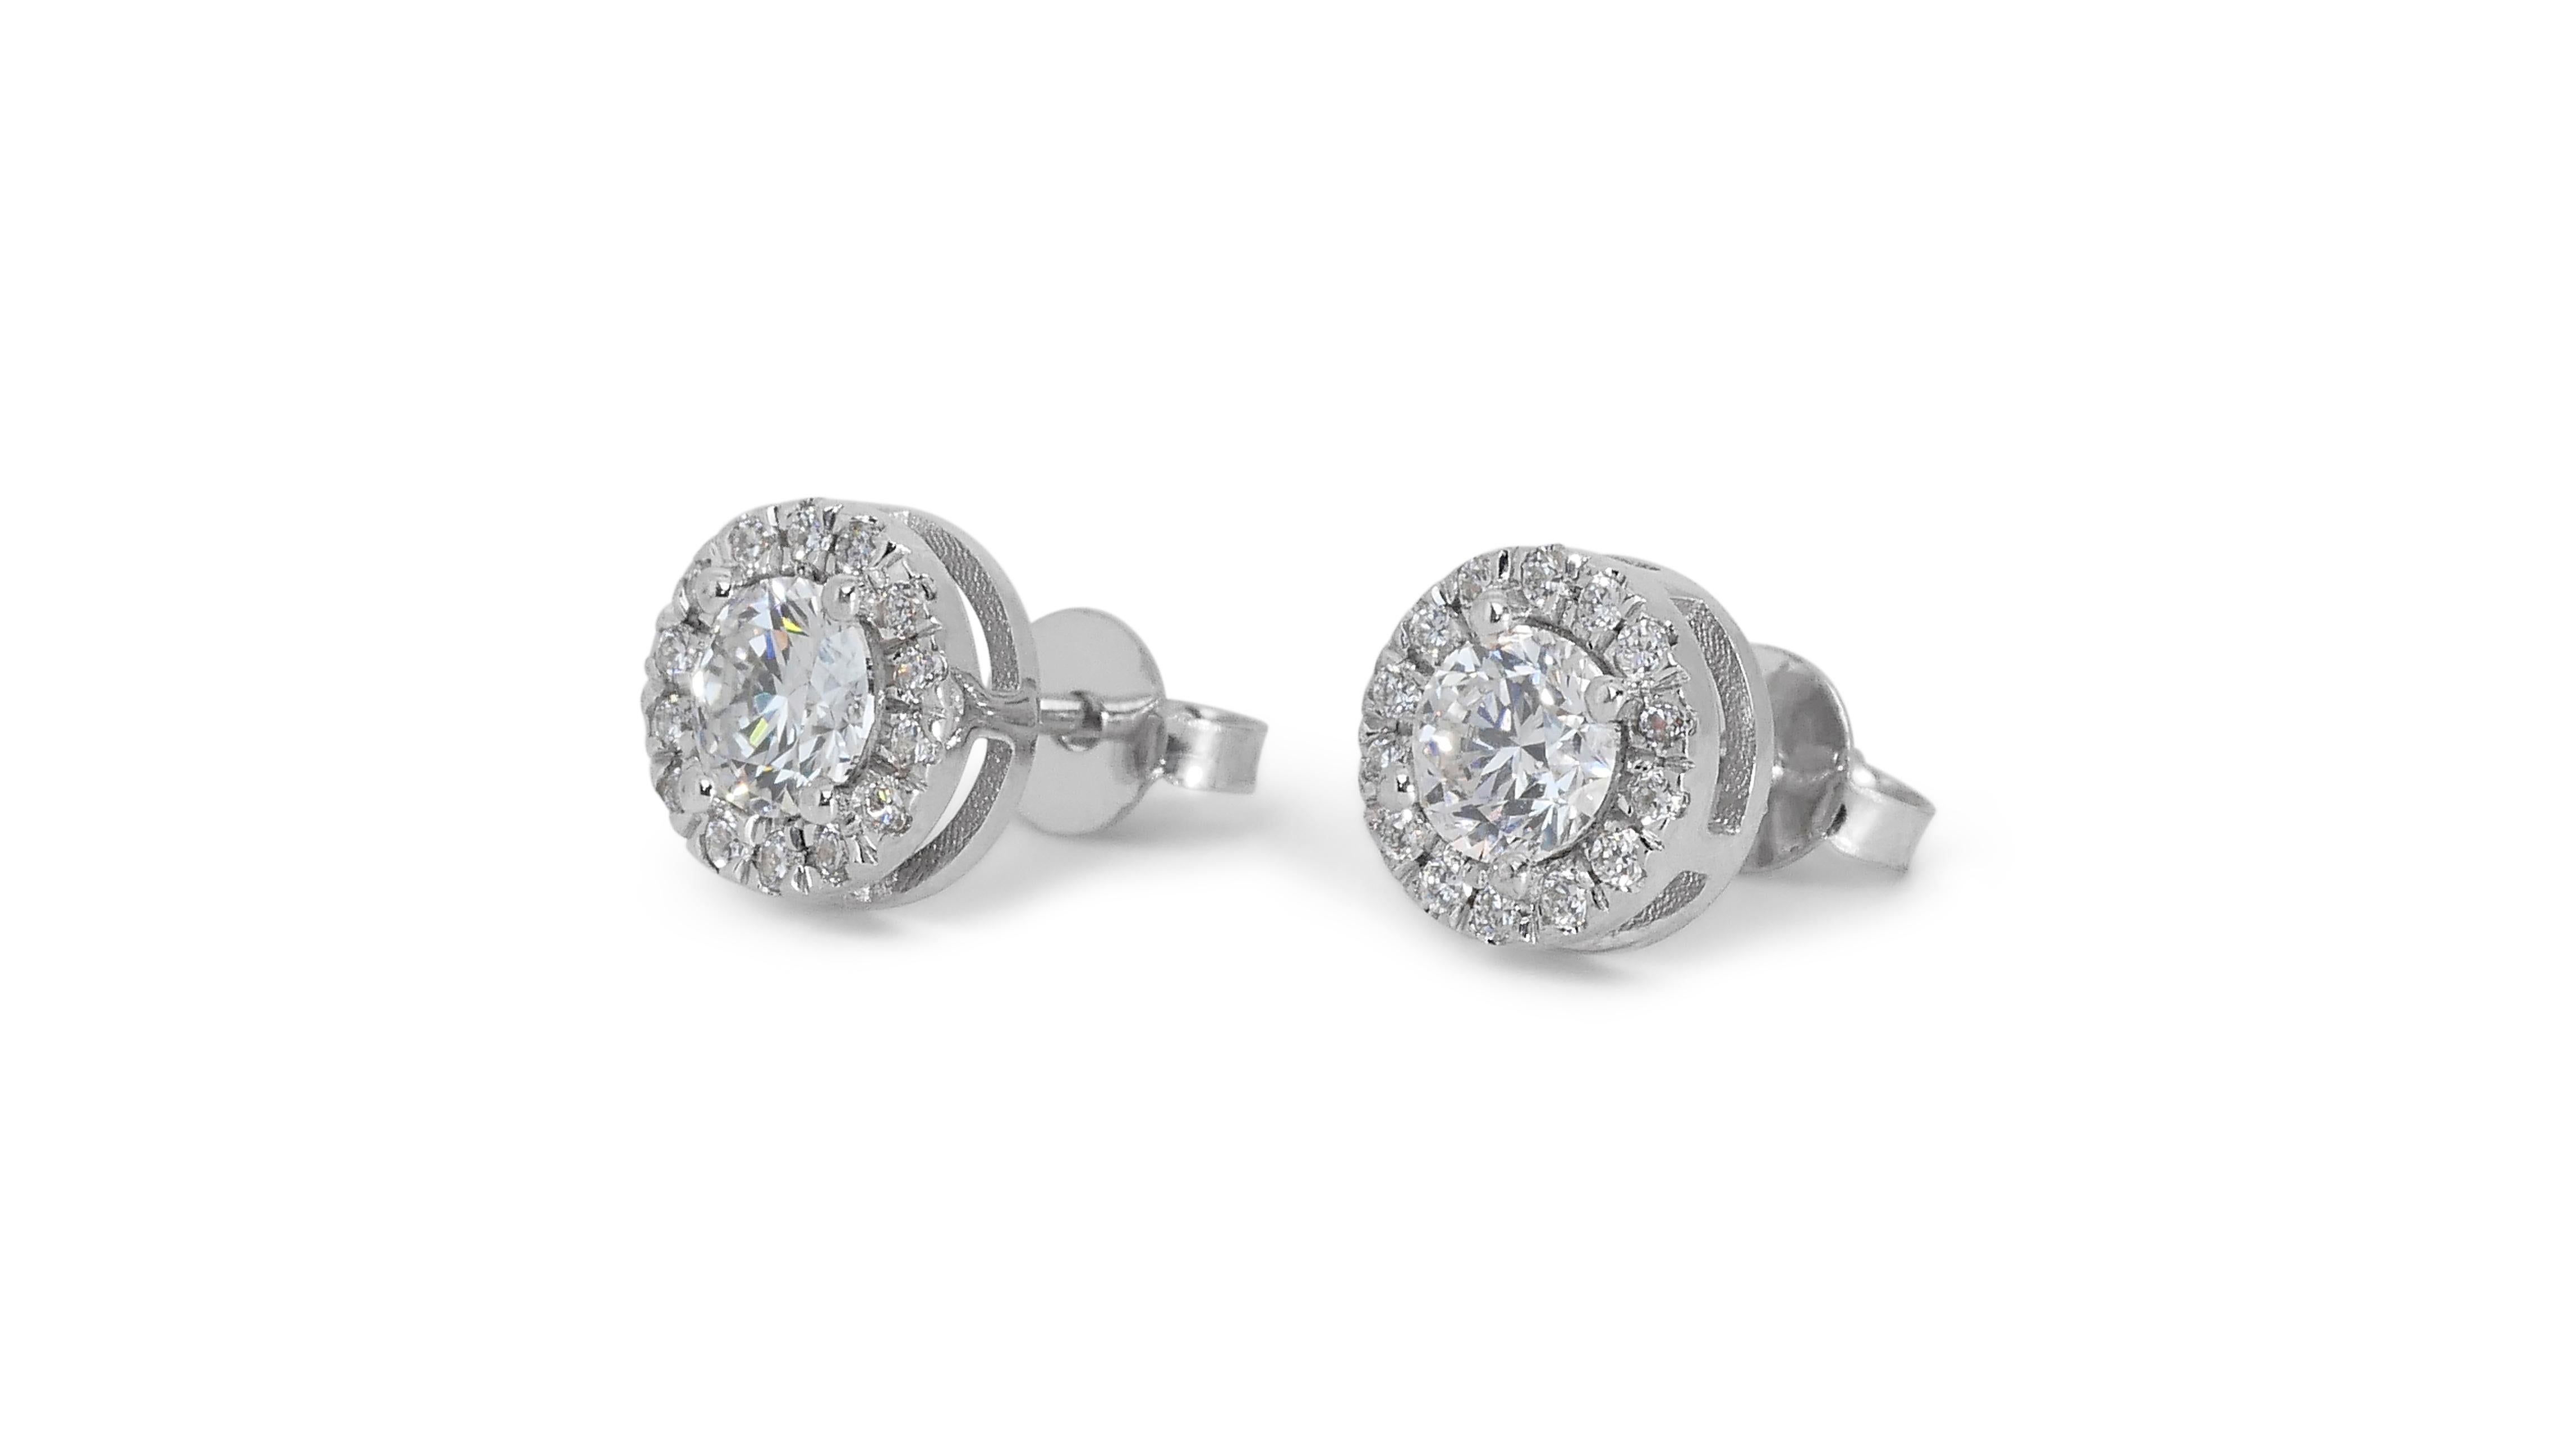 Marvelous 18k White Gold Halo Stud Earrings w/ 1.05ct Natural Diamonds AIG Cert In New Condition For Sale In רמת גן, IL